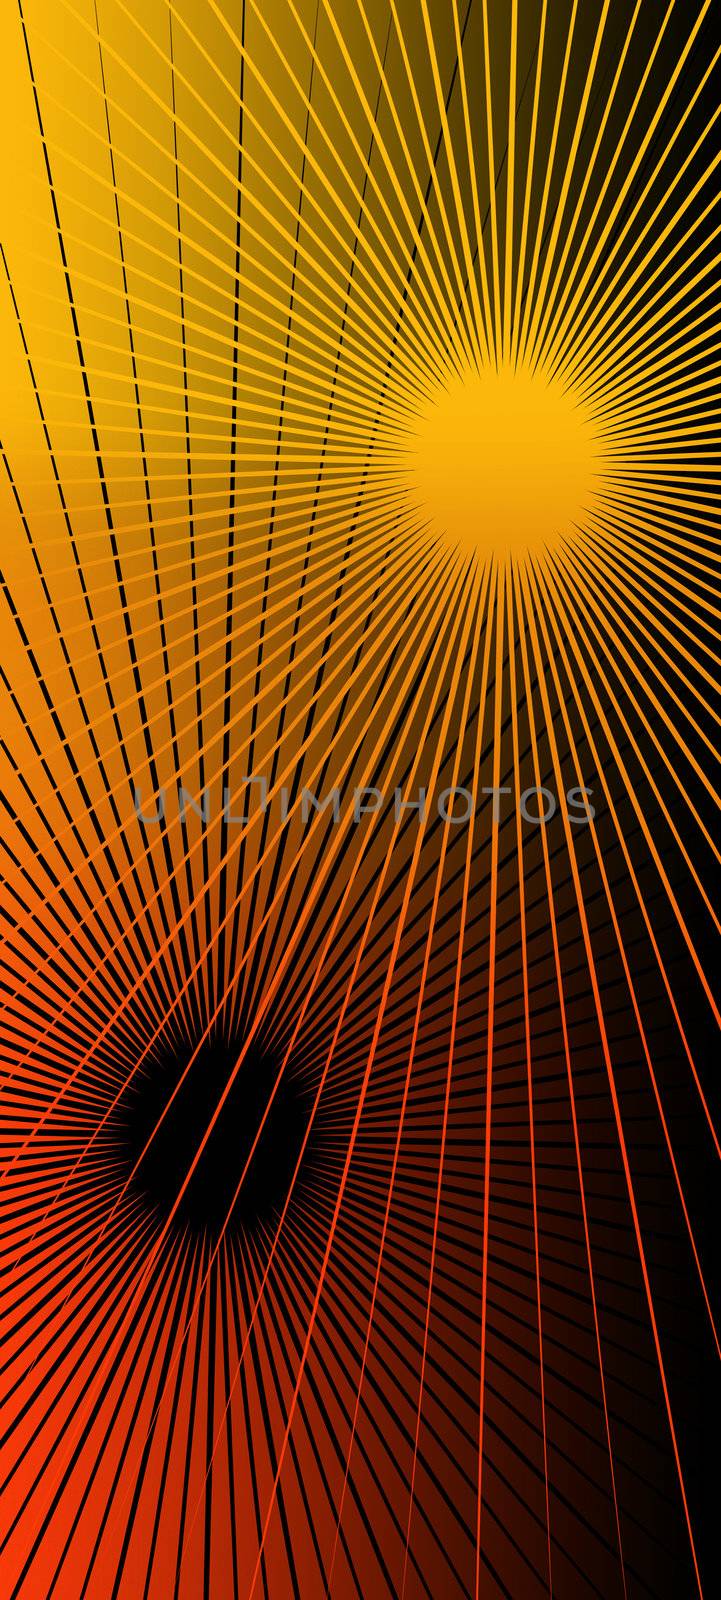 Abstract illustration depicting geometric red black and gold lines.